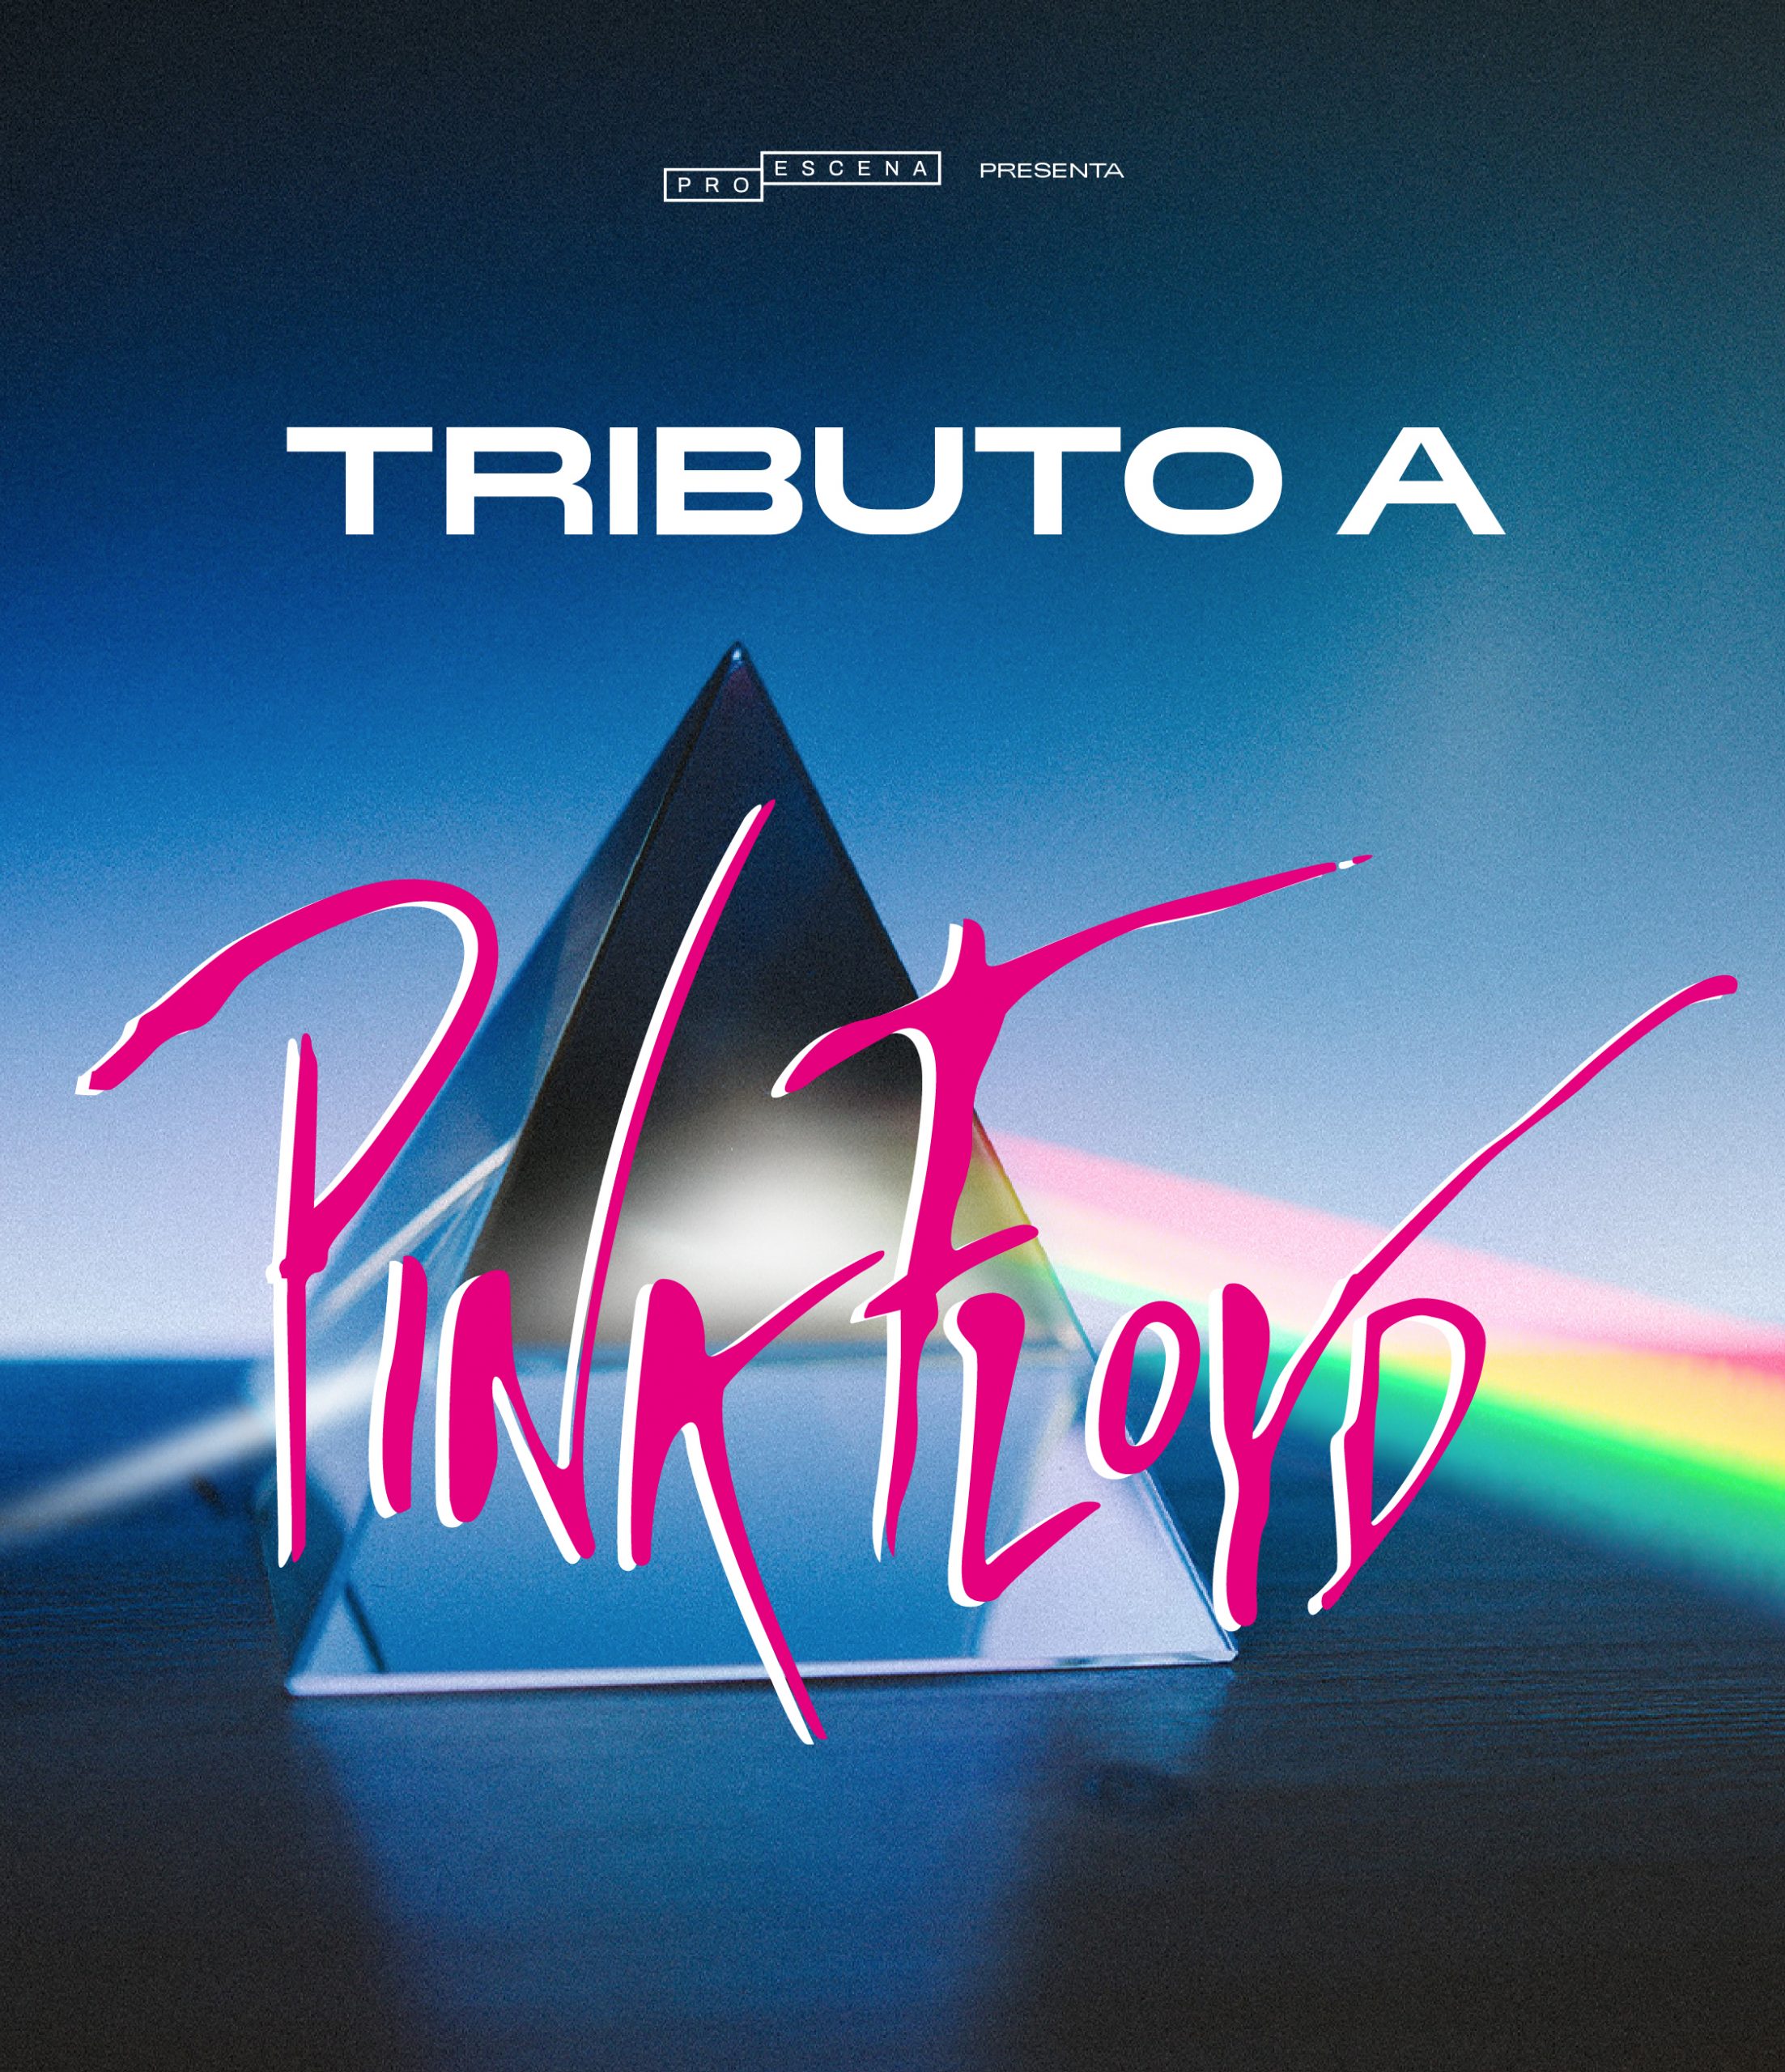 Tributo a Pink Floyd